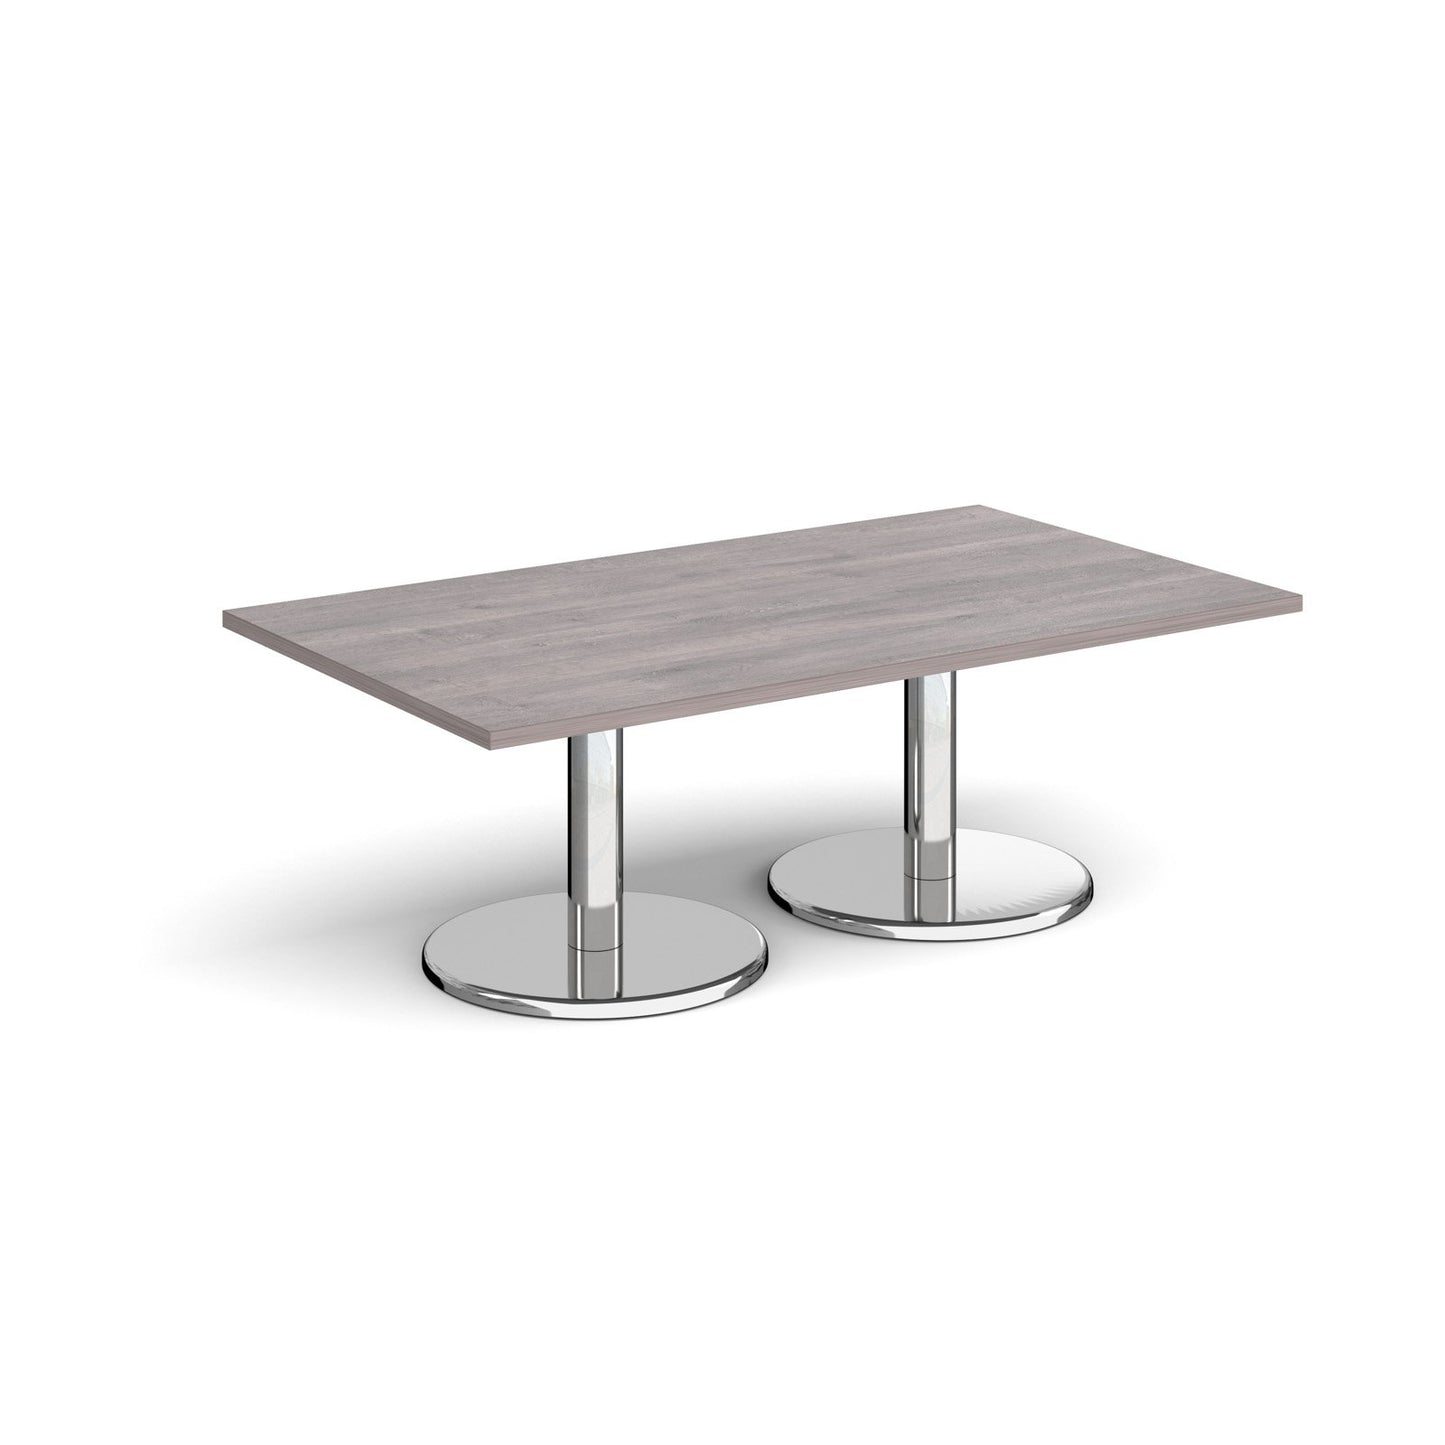 Pisa rectangular coffee table with round bases